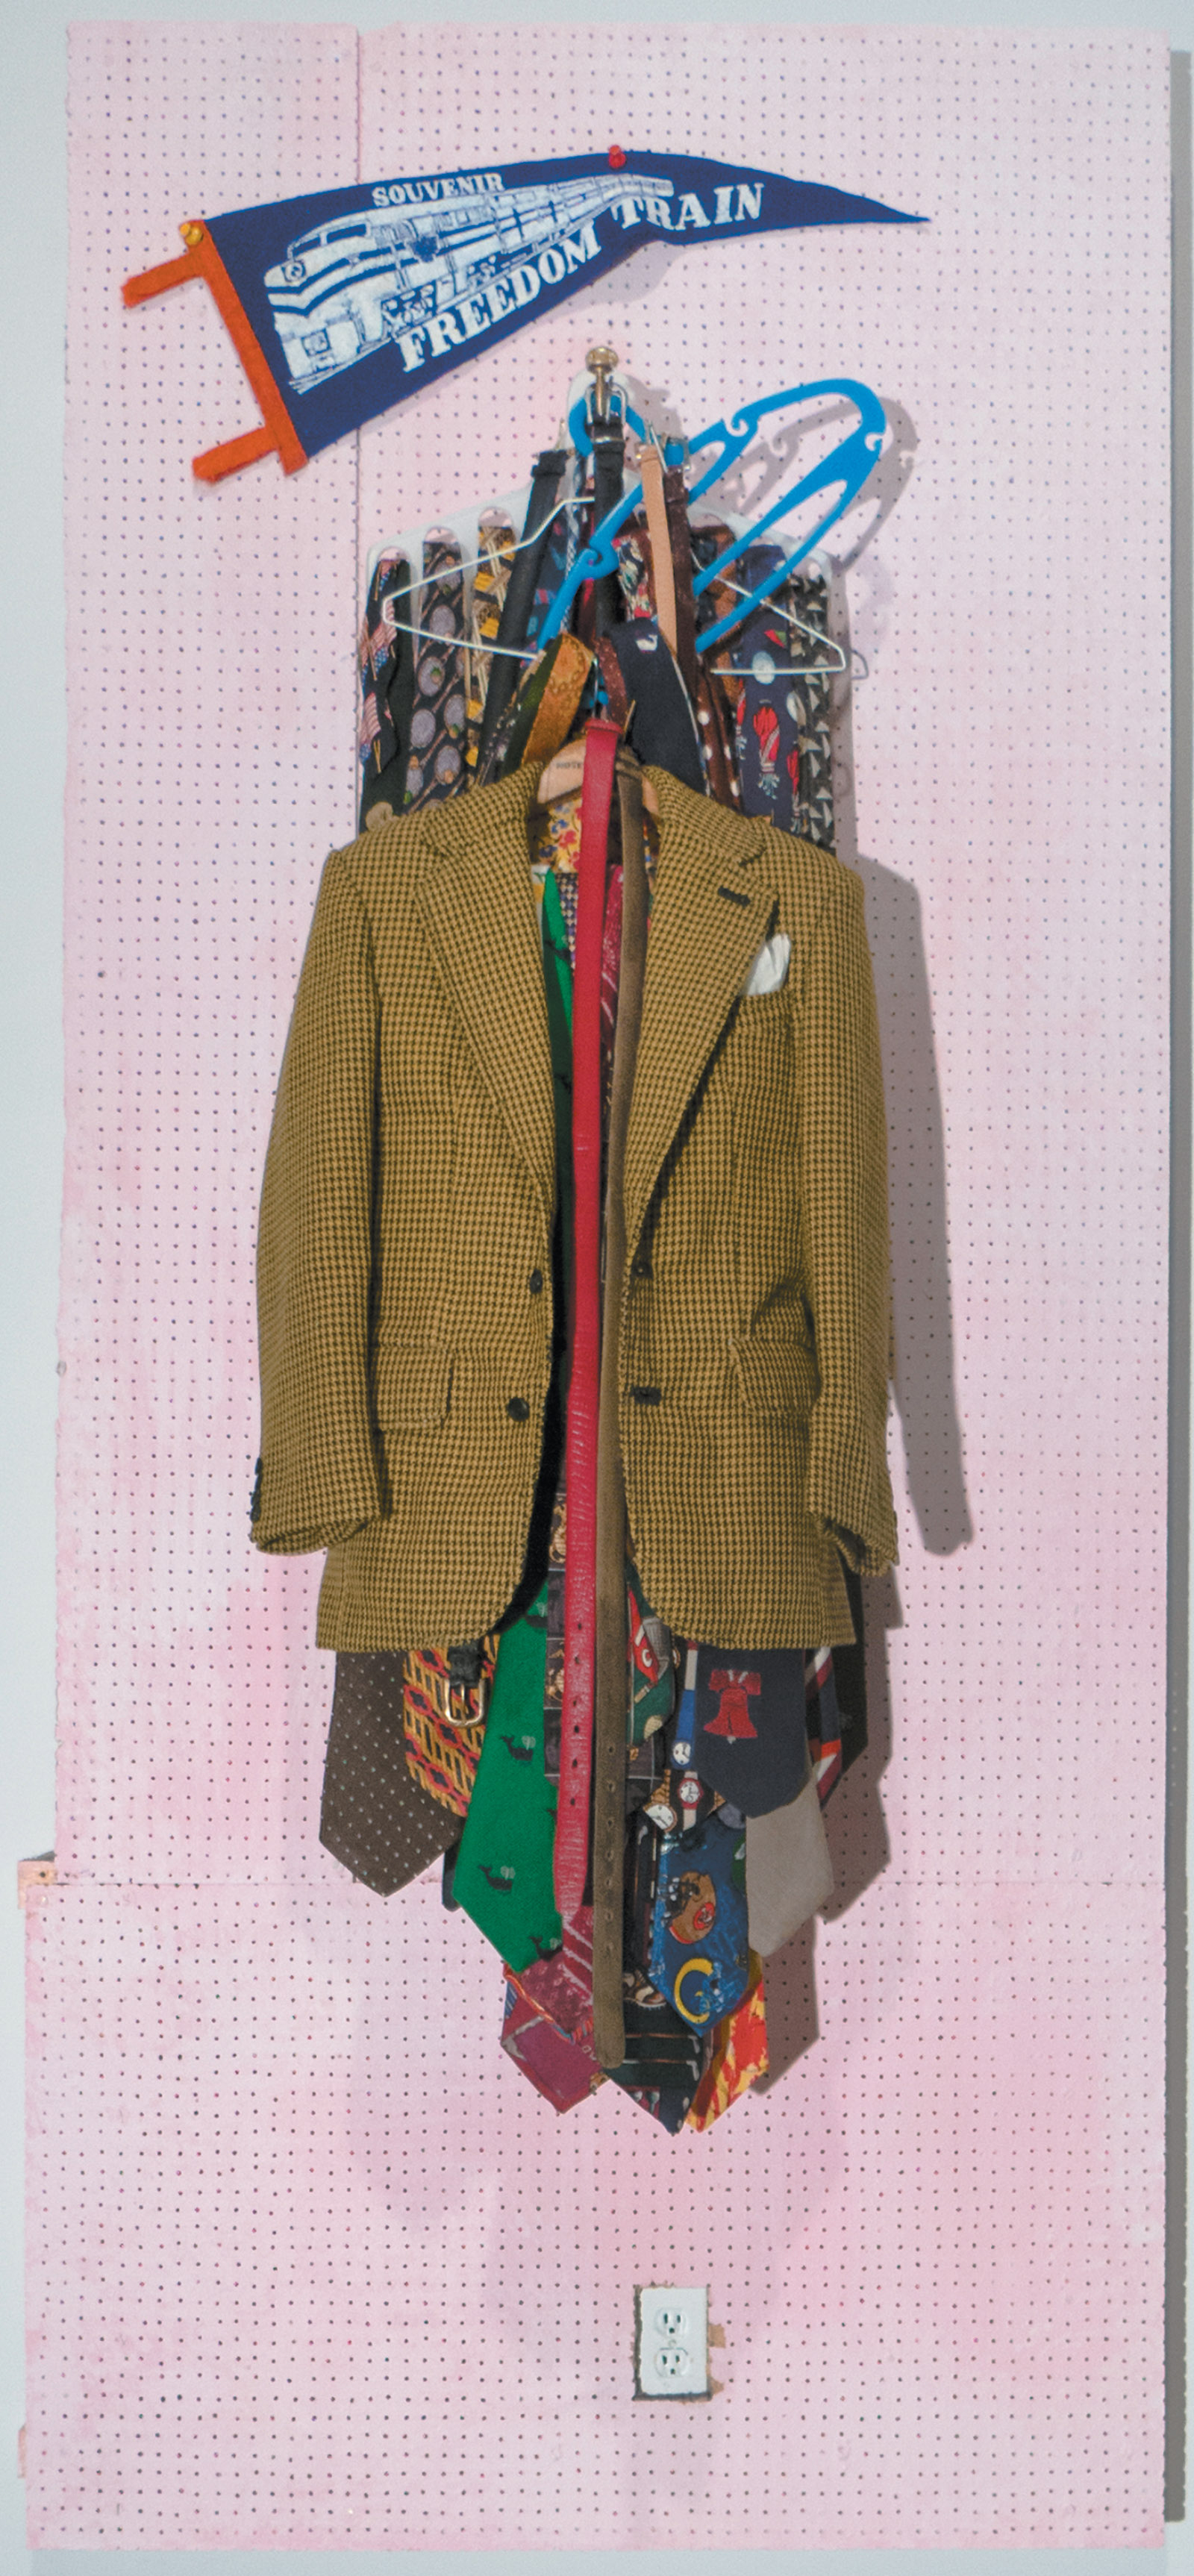 Charles LeDray: Freedom Train, 39 3/4 x 18 x 6 1/2 inches, 2013–2015. The jacket is about twenty inches high.